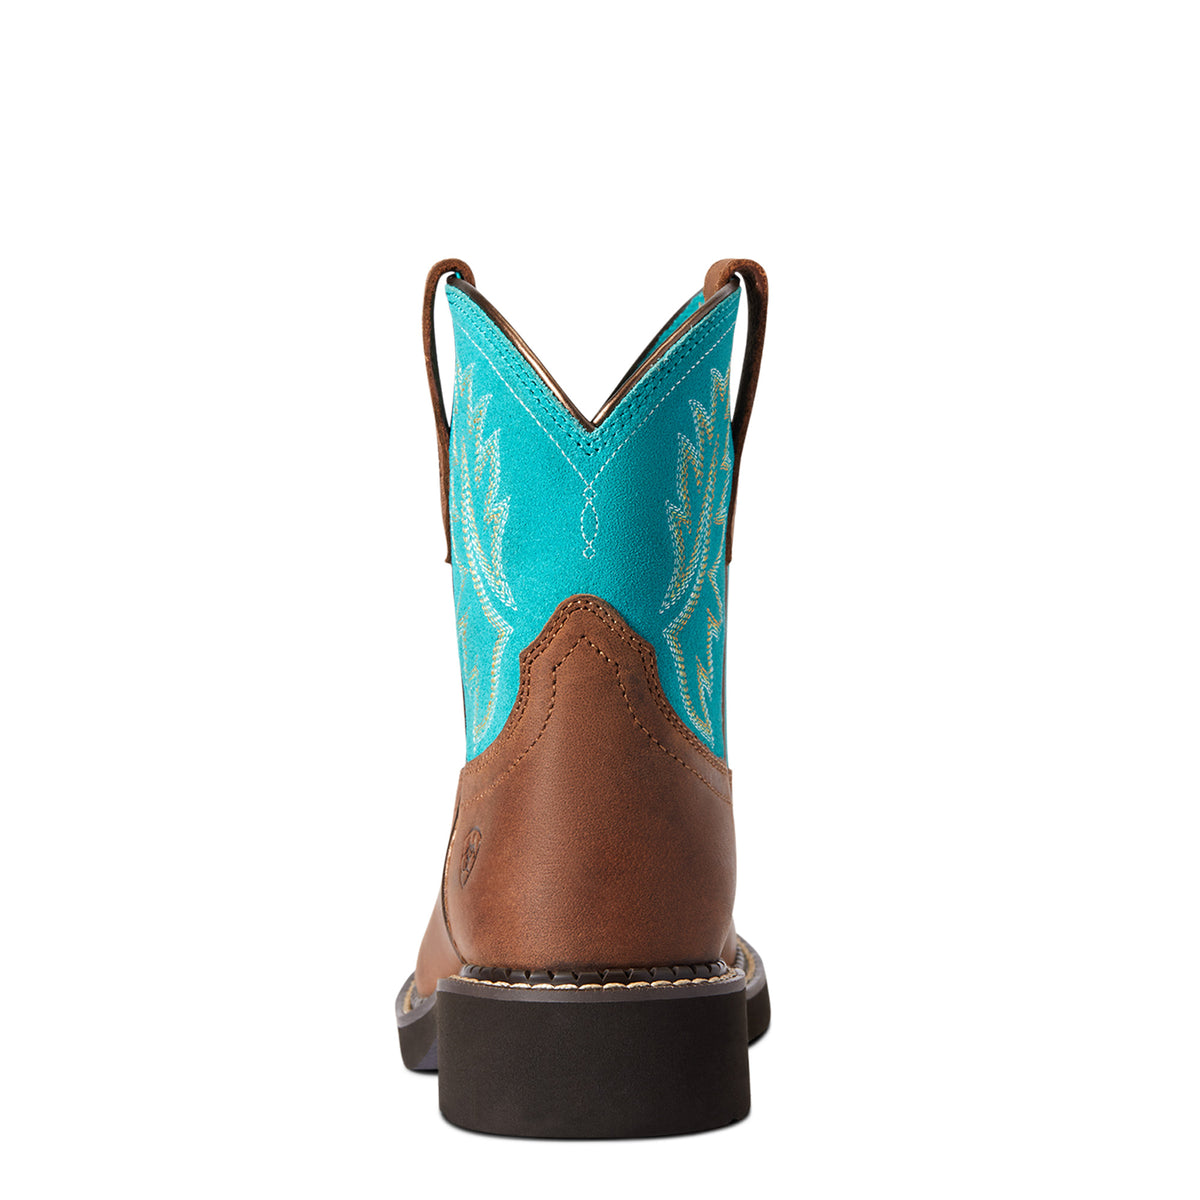 Ariat Kids Fatbaby Heritage - Distressed Brown/Turquoise